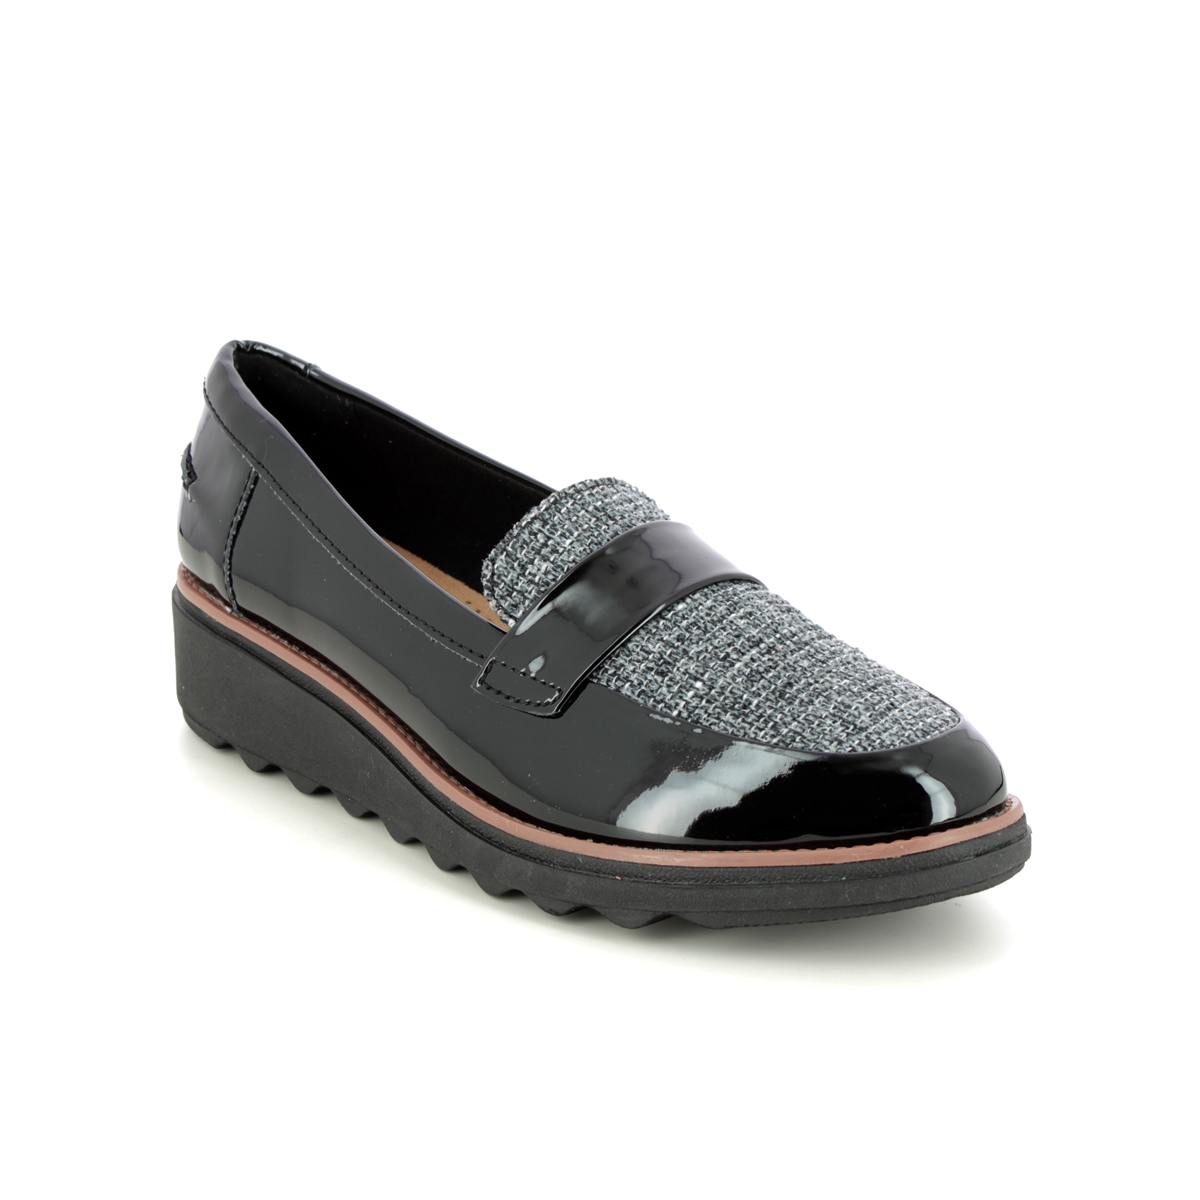 Clarks Sharon Gracie Black Patent Womens Loafers 640824D In Size 6 In Plain Black Patent